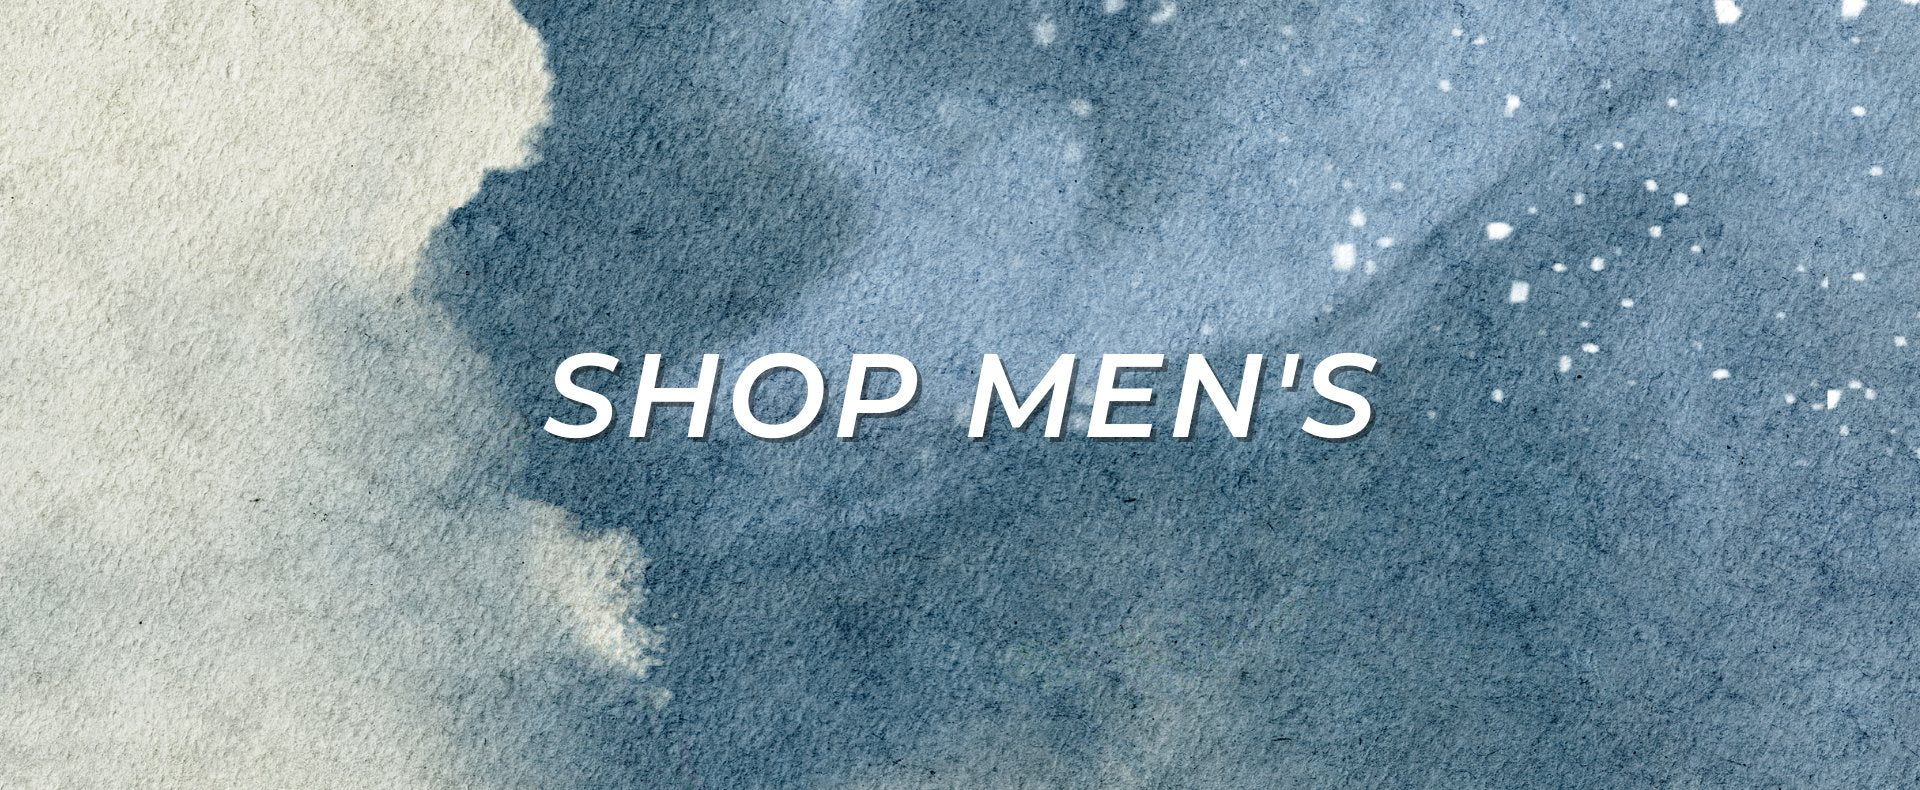 Holiday Gift Guide - Shop Men's